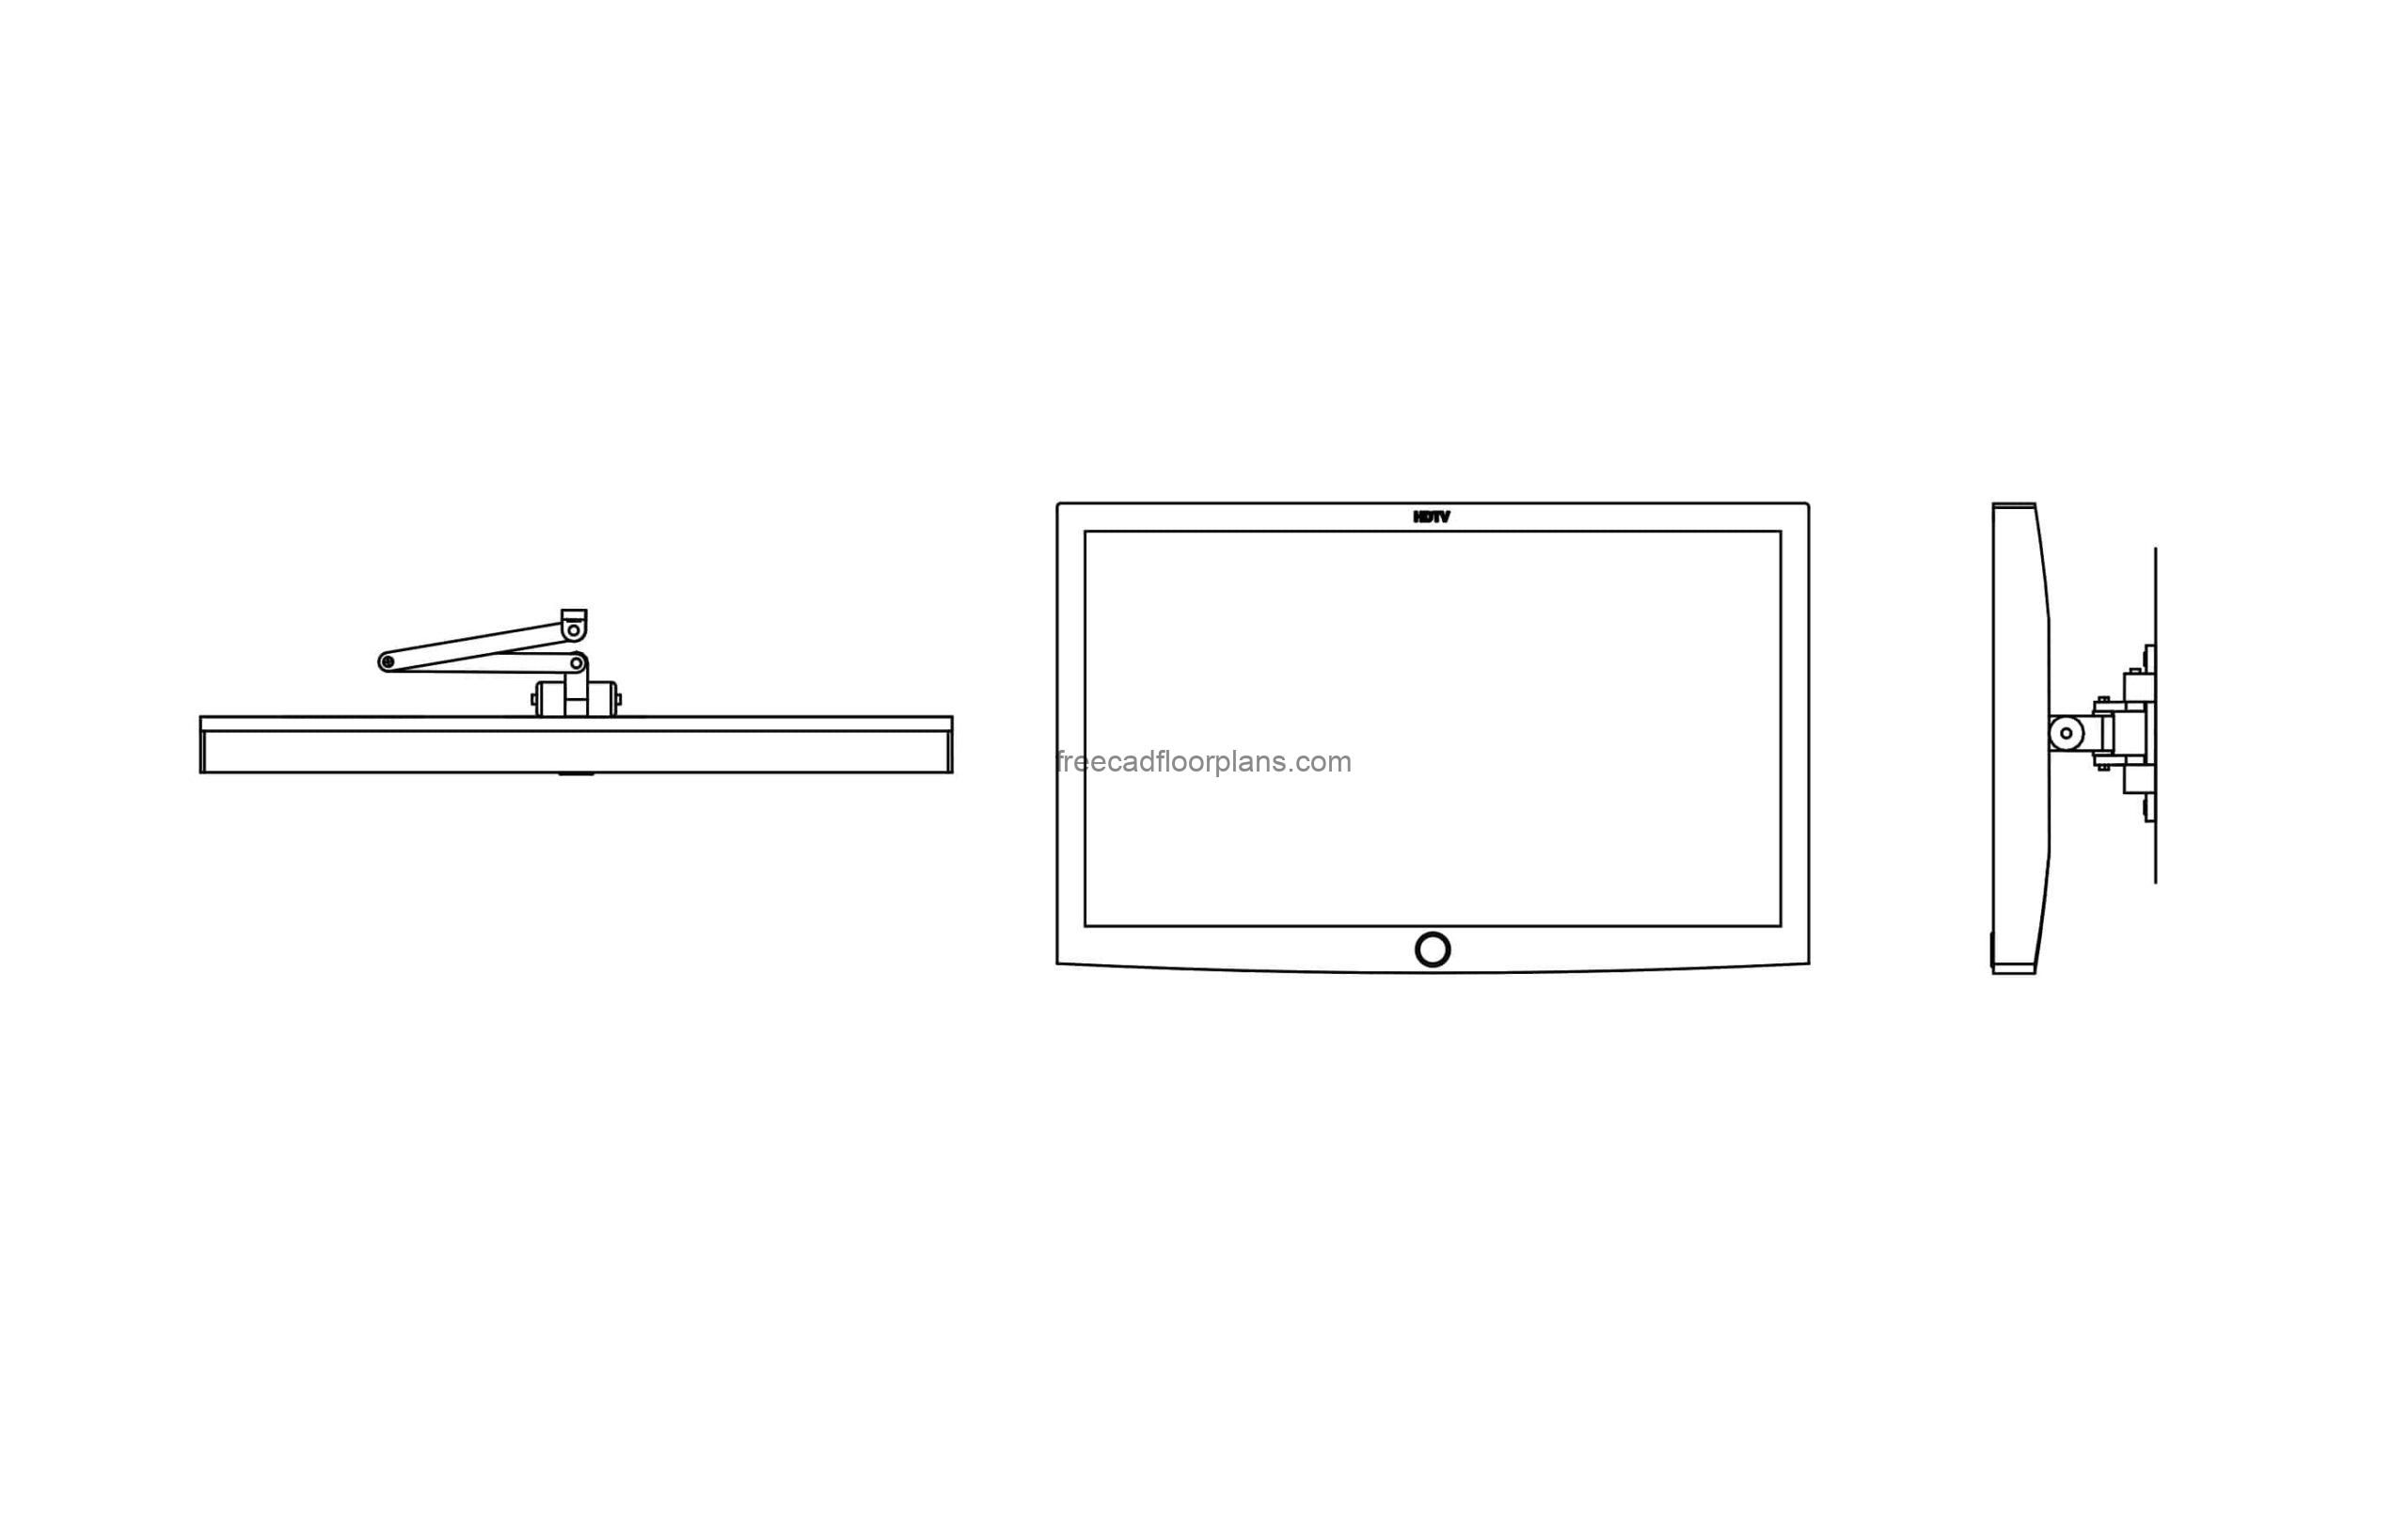 cad block drawing of wall mounted tv fron, top and side views dwg file for free download